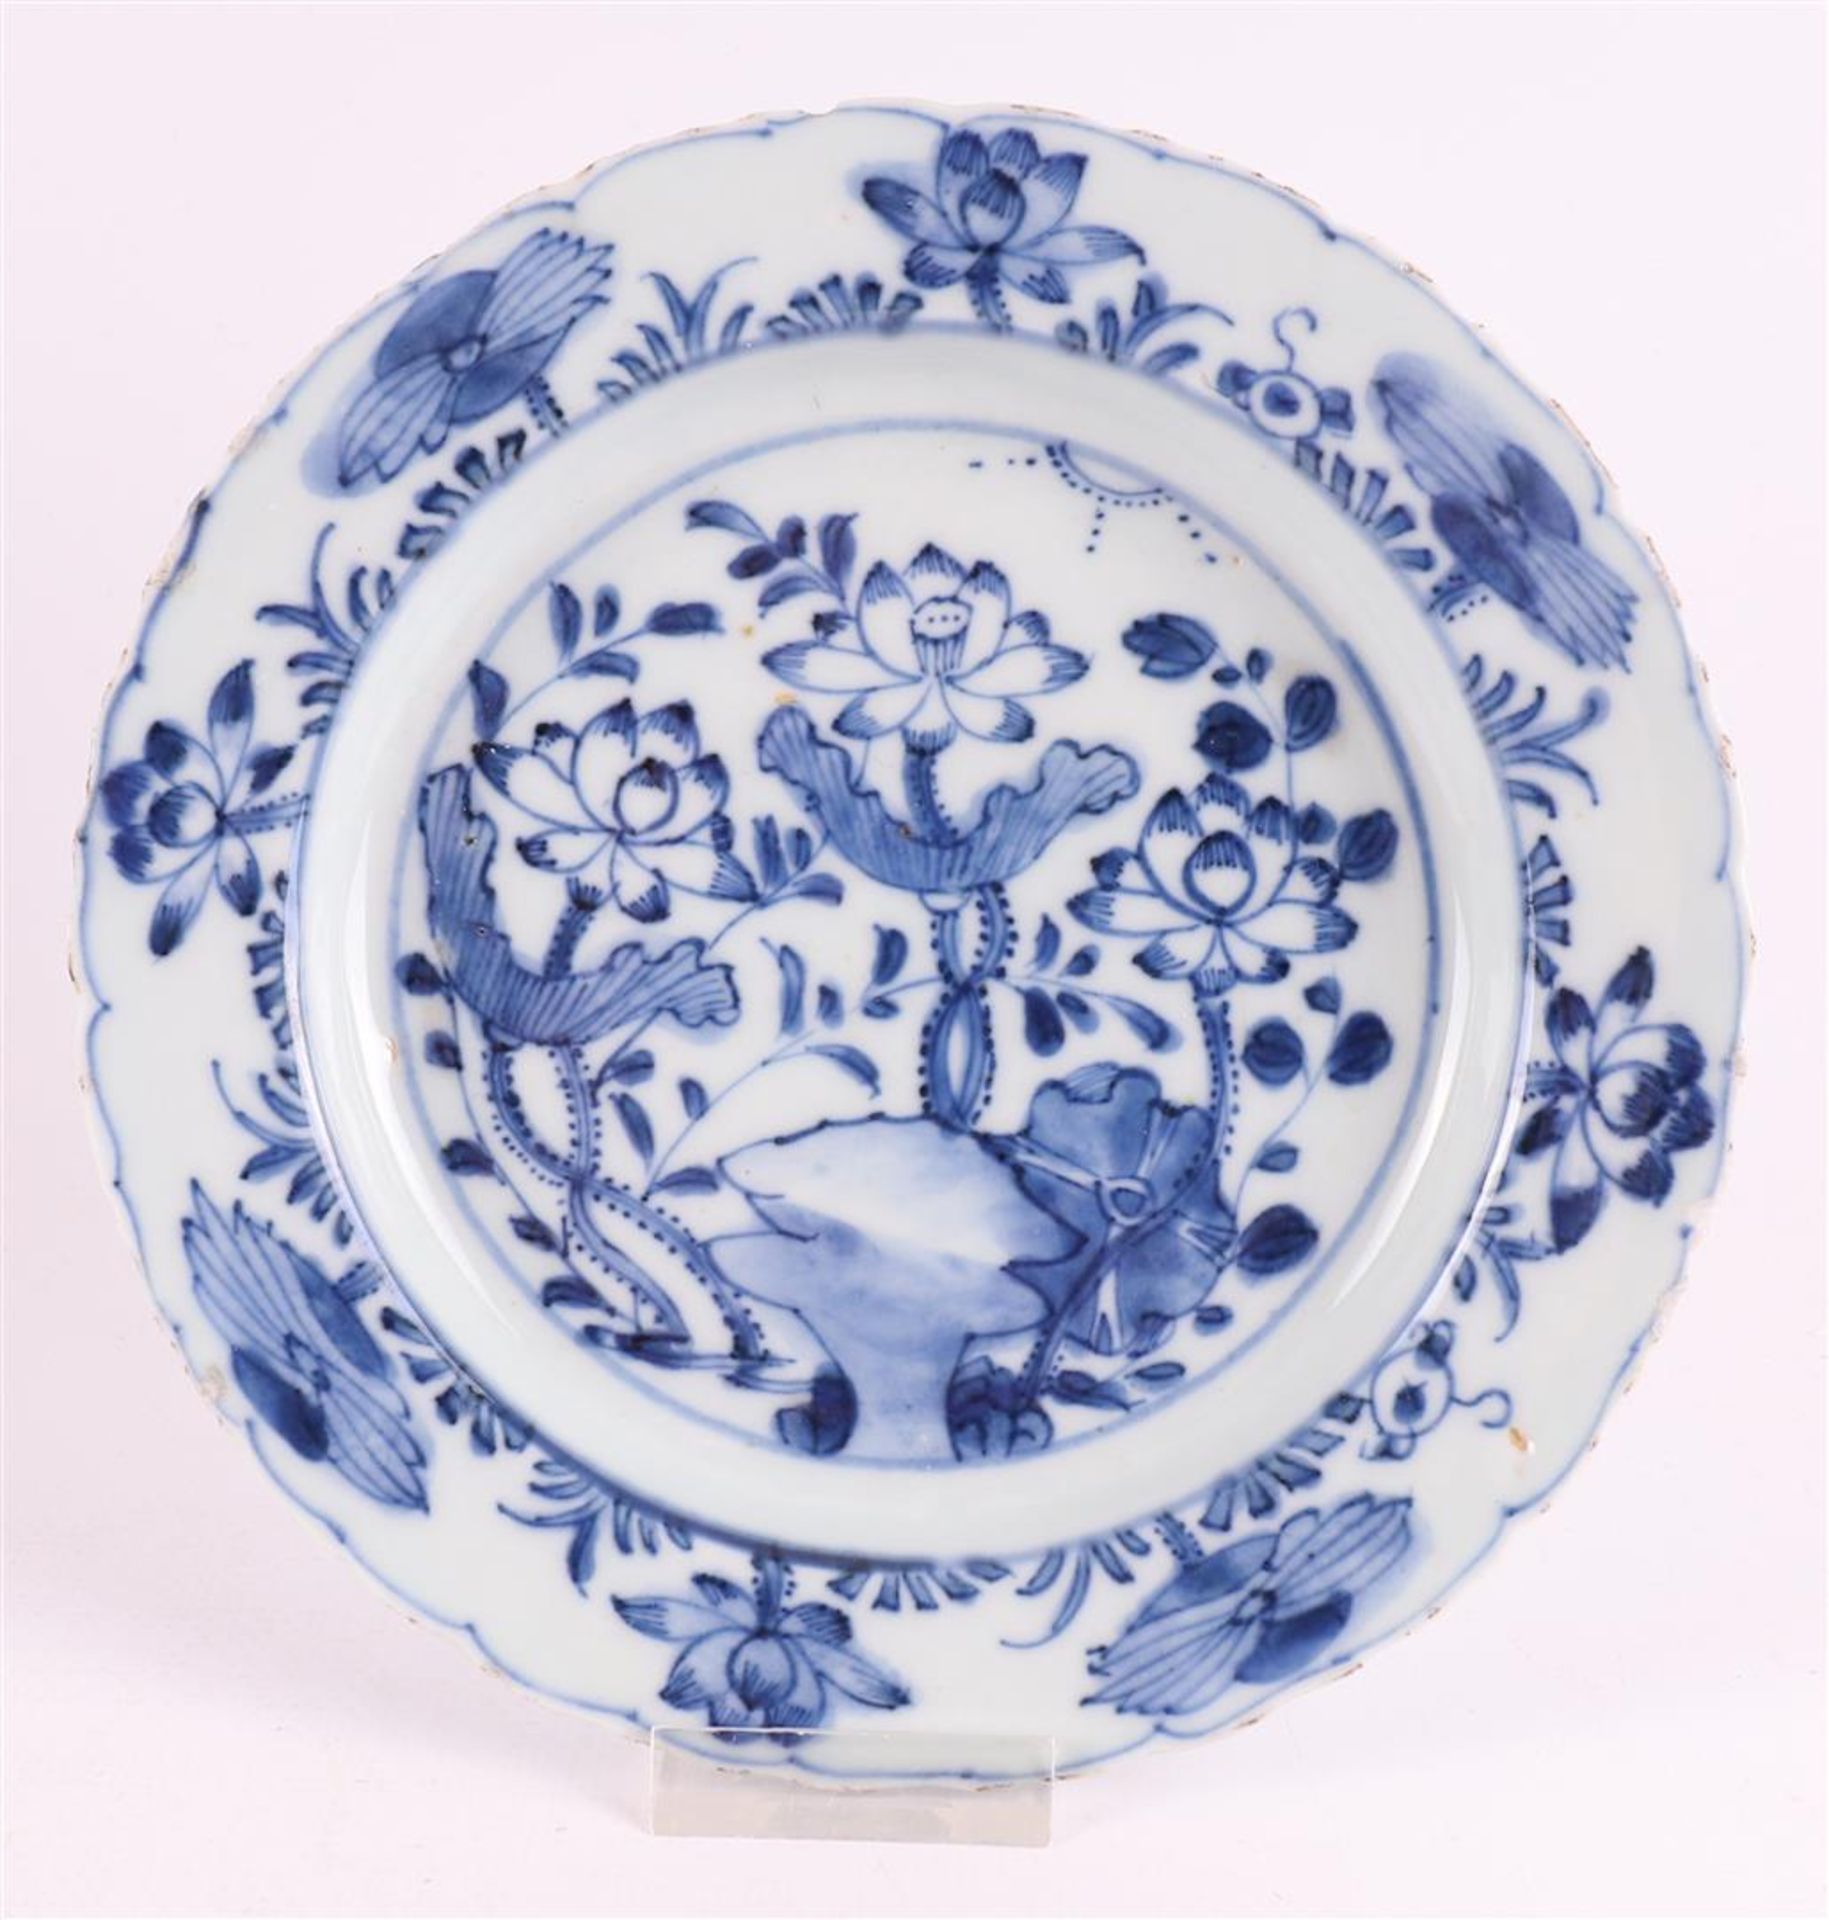 A blue/white porcelain contoured plate, China, 2nd half of the 17th century.